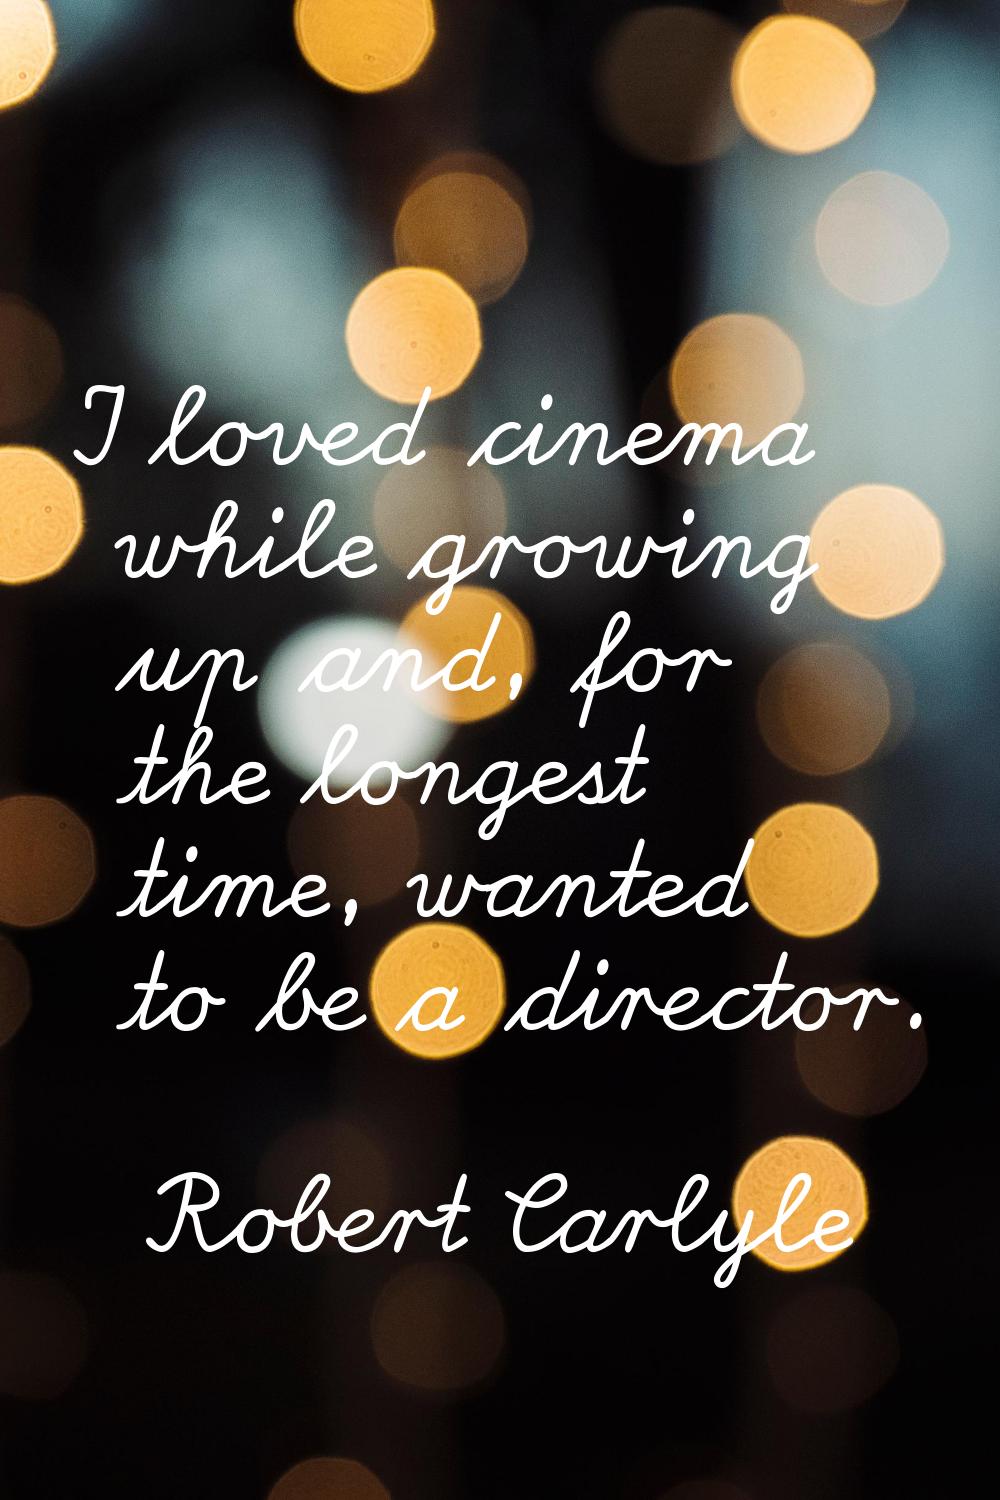 I loved cinema while growing up and, for the longest time, wanted to be a director.